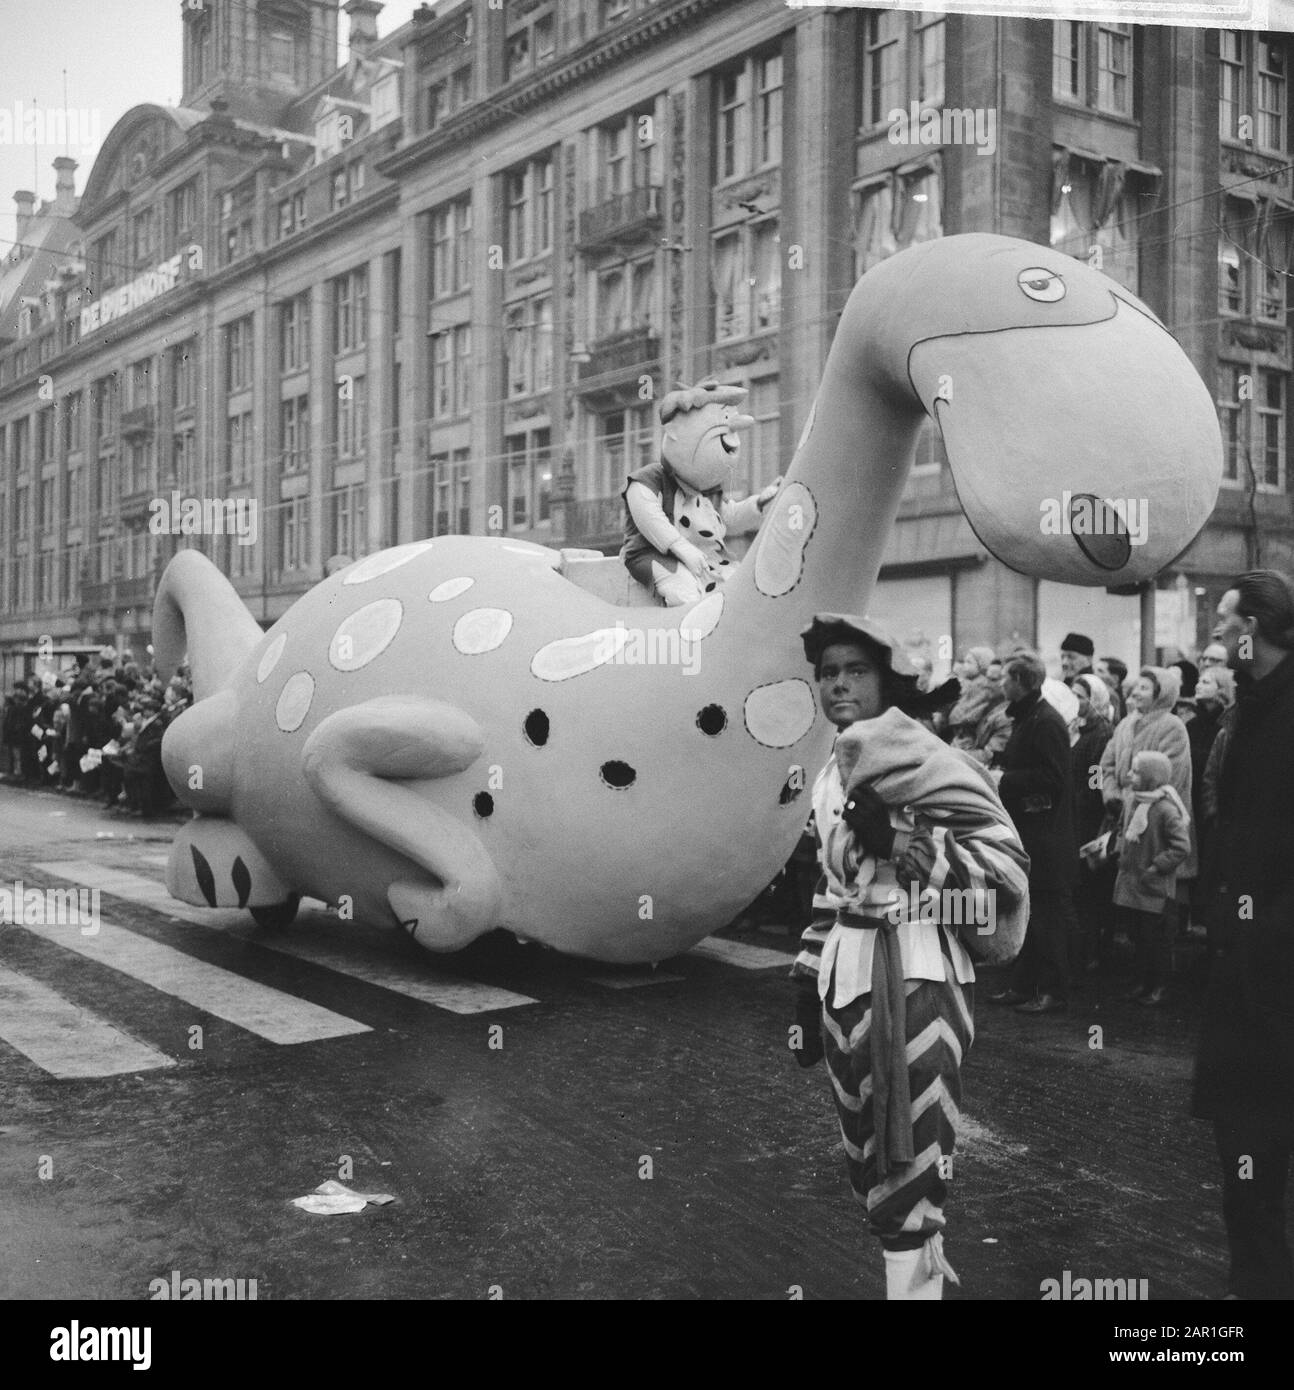 Entry of Saint Nicholas in Amsterdam  Zwarte Piet pose in front of a riding Dino with on his back Barney Rubble from the cartoon series The Flintstones Annotation: In the background department store De Bijenkorf Date: 20 november 1965 Location: Amsterdam, Noord-Holland Keywords: Sinterklaas, Zwarte Piet, public, traditions, folk culture Stock Photo